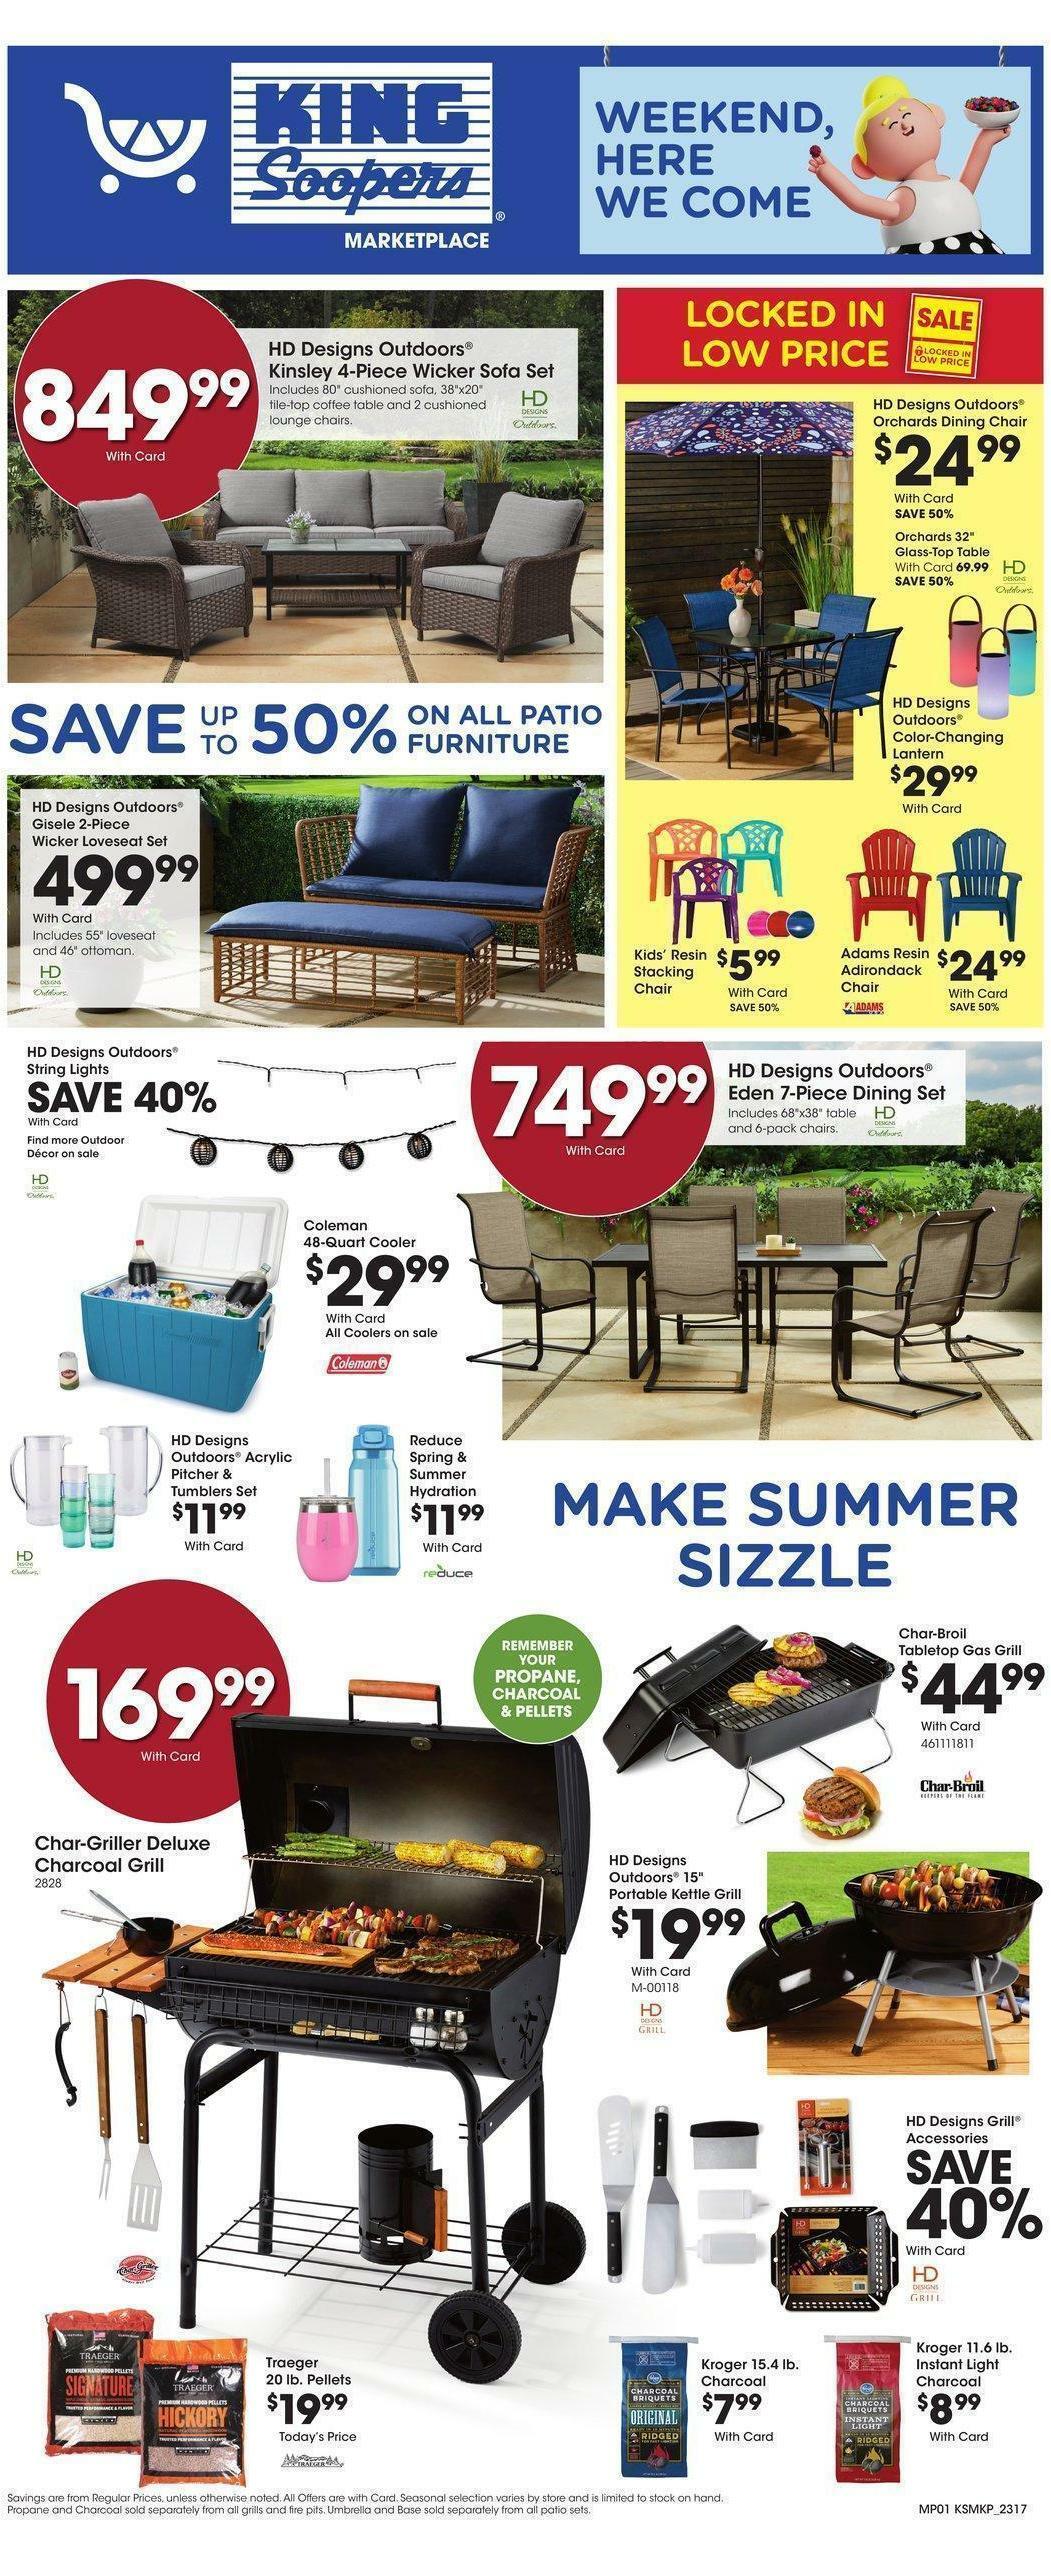 King Soopers Weekend Here We Come Weekly Ad from May 24